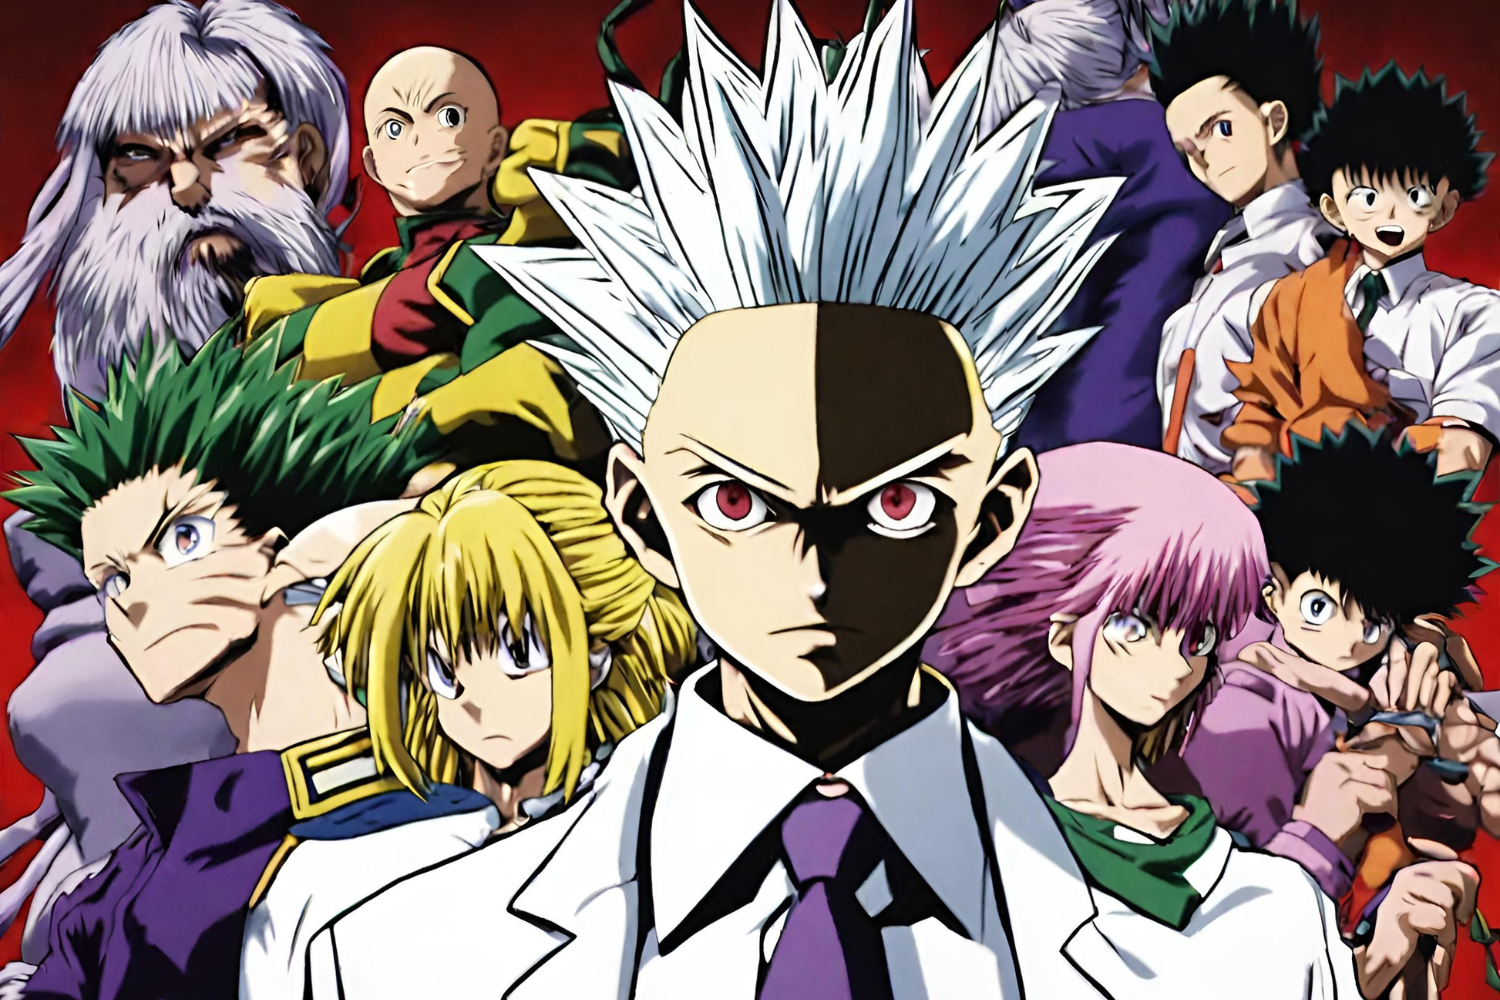 Strongest Characters in Hunter x Hunter